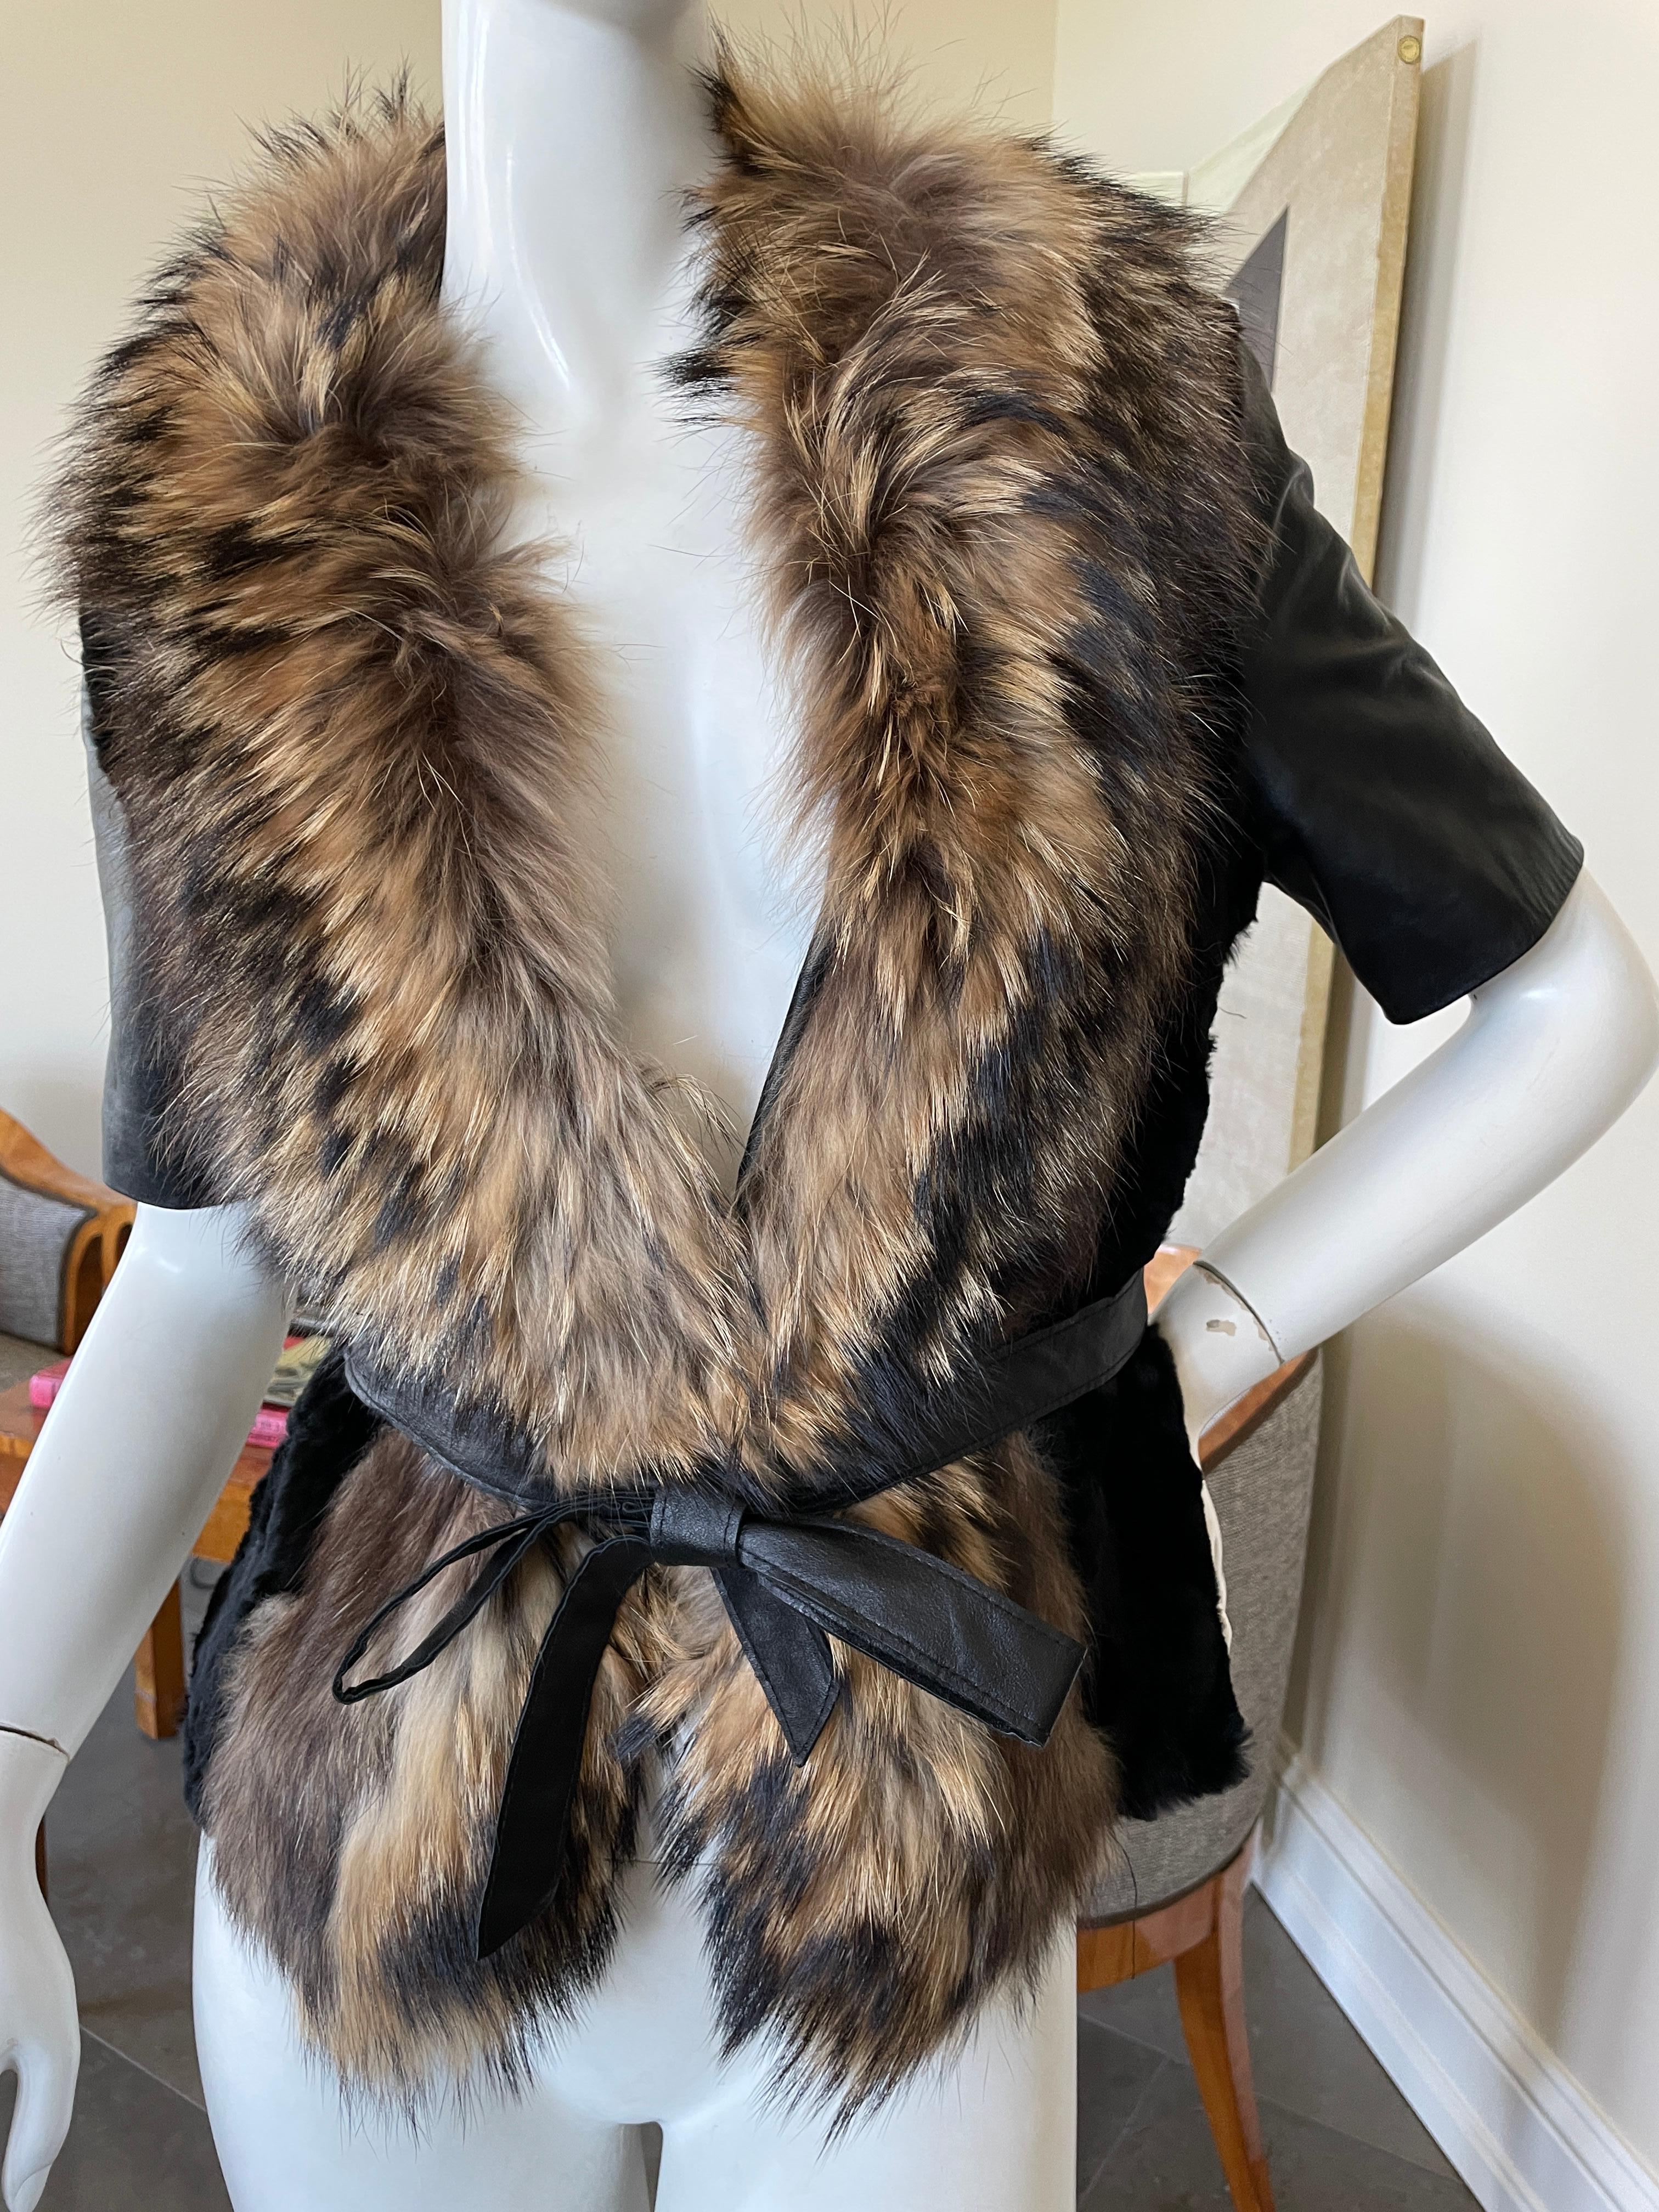 Roberto Cavalli Vintage Black Fur Short Jacket with Dramatic Fur Collar
Please use the zoom feature to see all the great details.
Size M-L there is no size label.
Bust 36